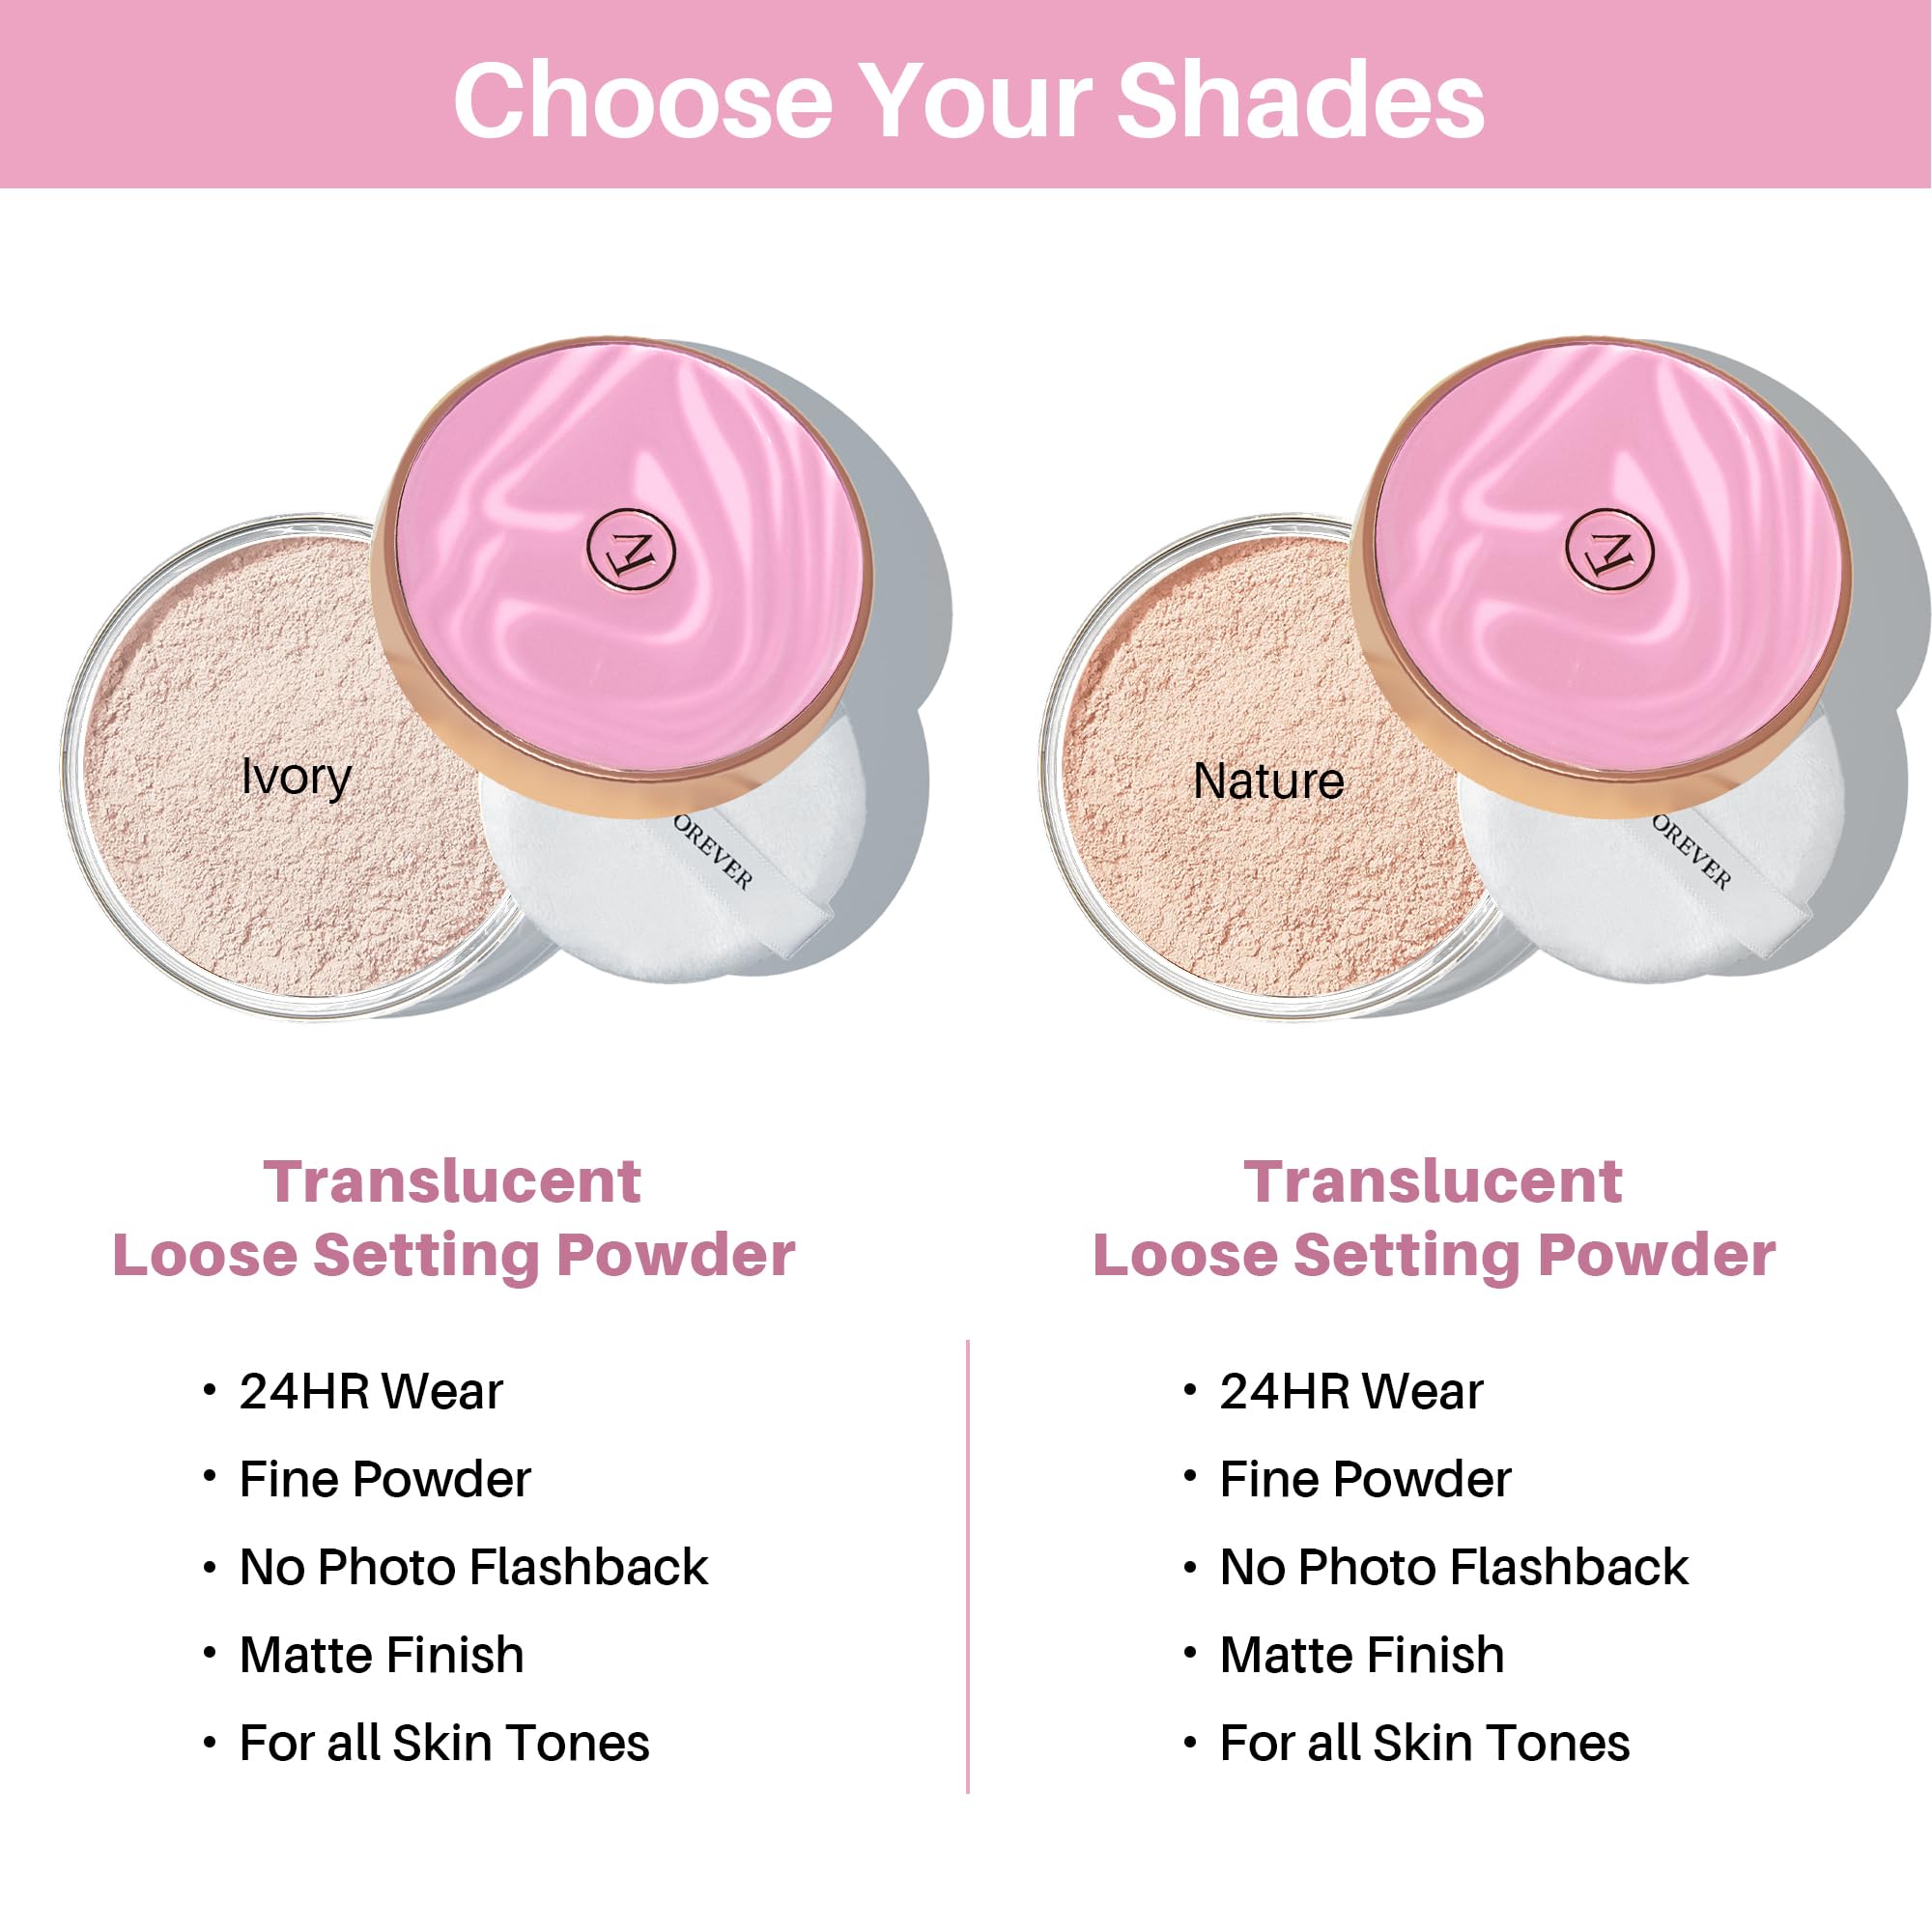 FV Translucent Loose Face Powder, Long Lasting & Lightweight Setting Powder with Matte Finish, Fine Powder for Natural Look, Minimizing Pores and Fine Lines Baking Powder 0.35oz (10g)